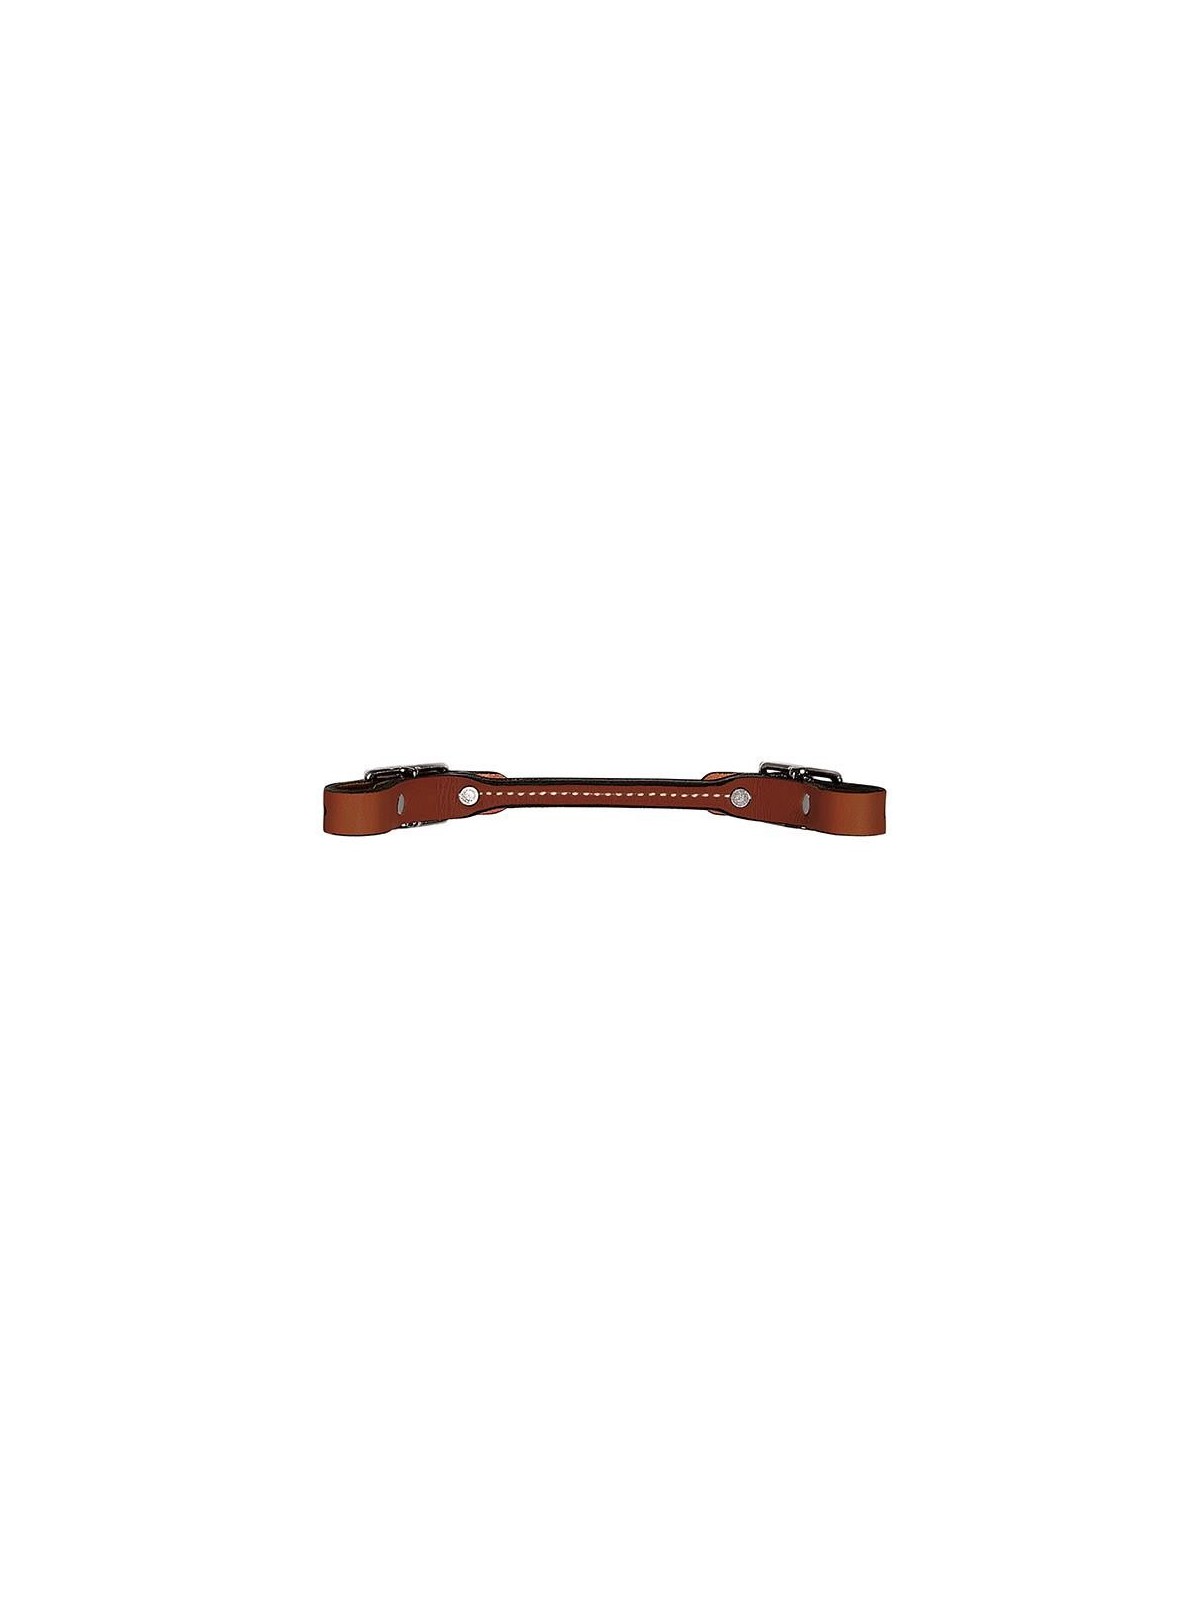 Weaver Bridle Leather Rounded Curb Straps Brown 30-1310-BR